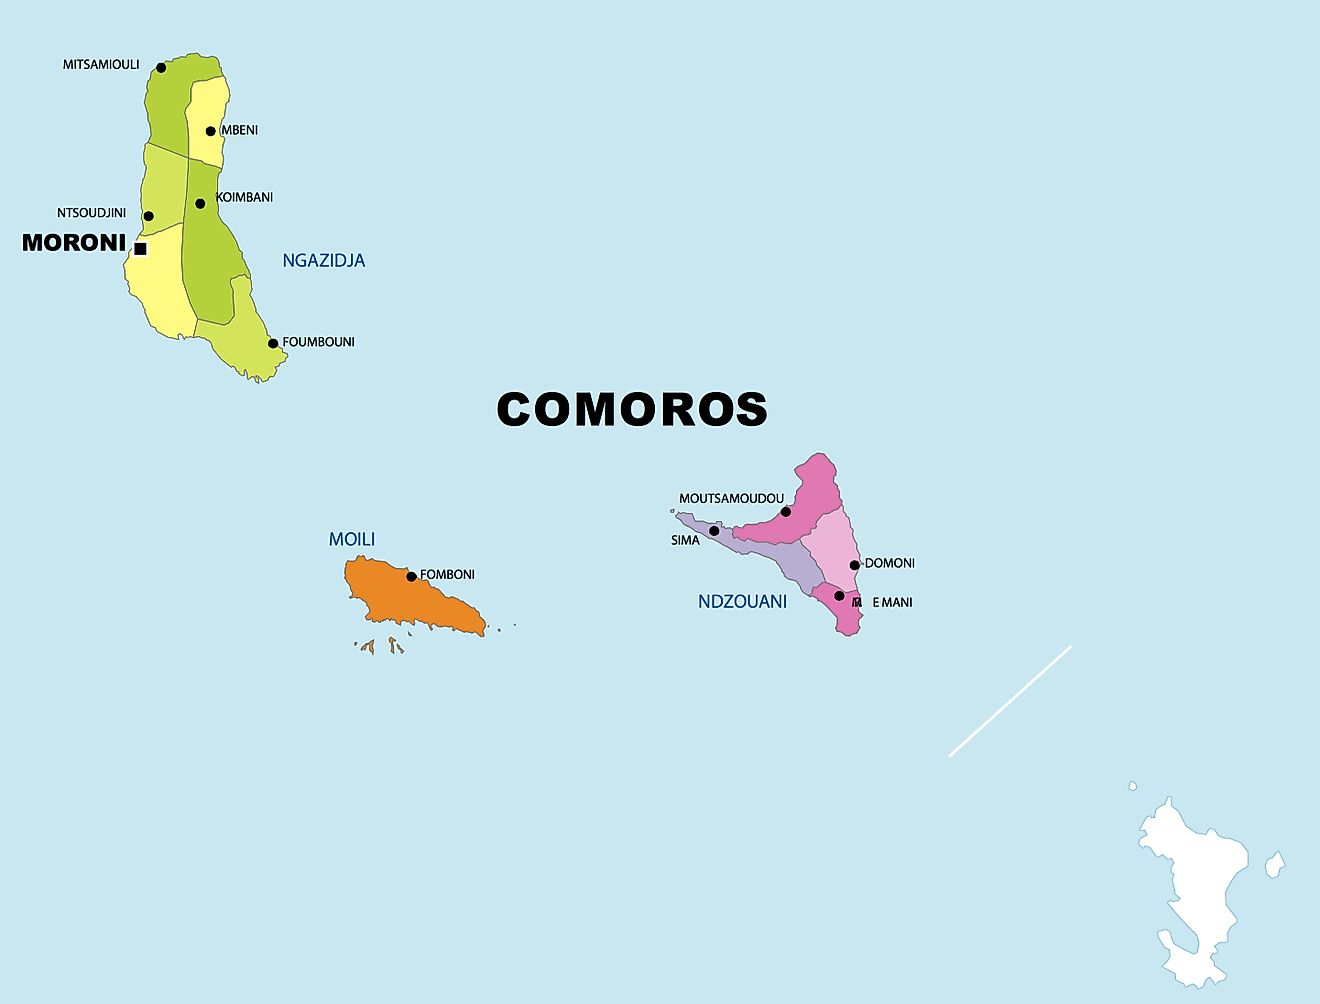 Political Map of Comoros showing 3 islands and national capital of Moroni.